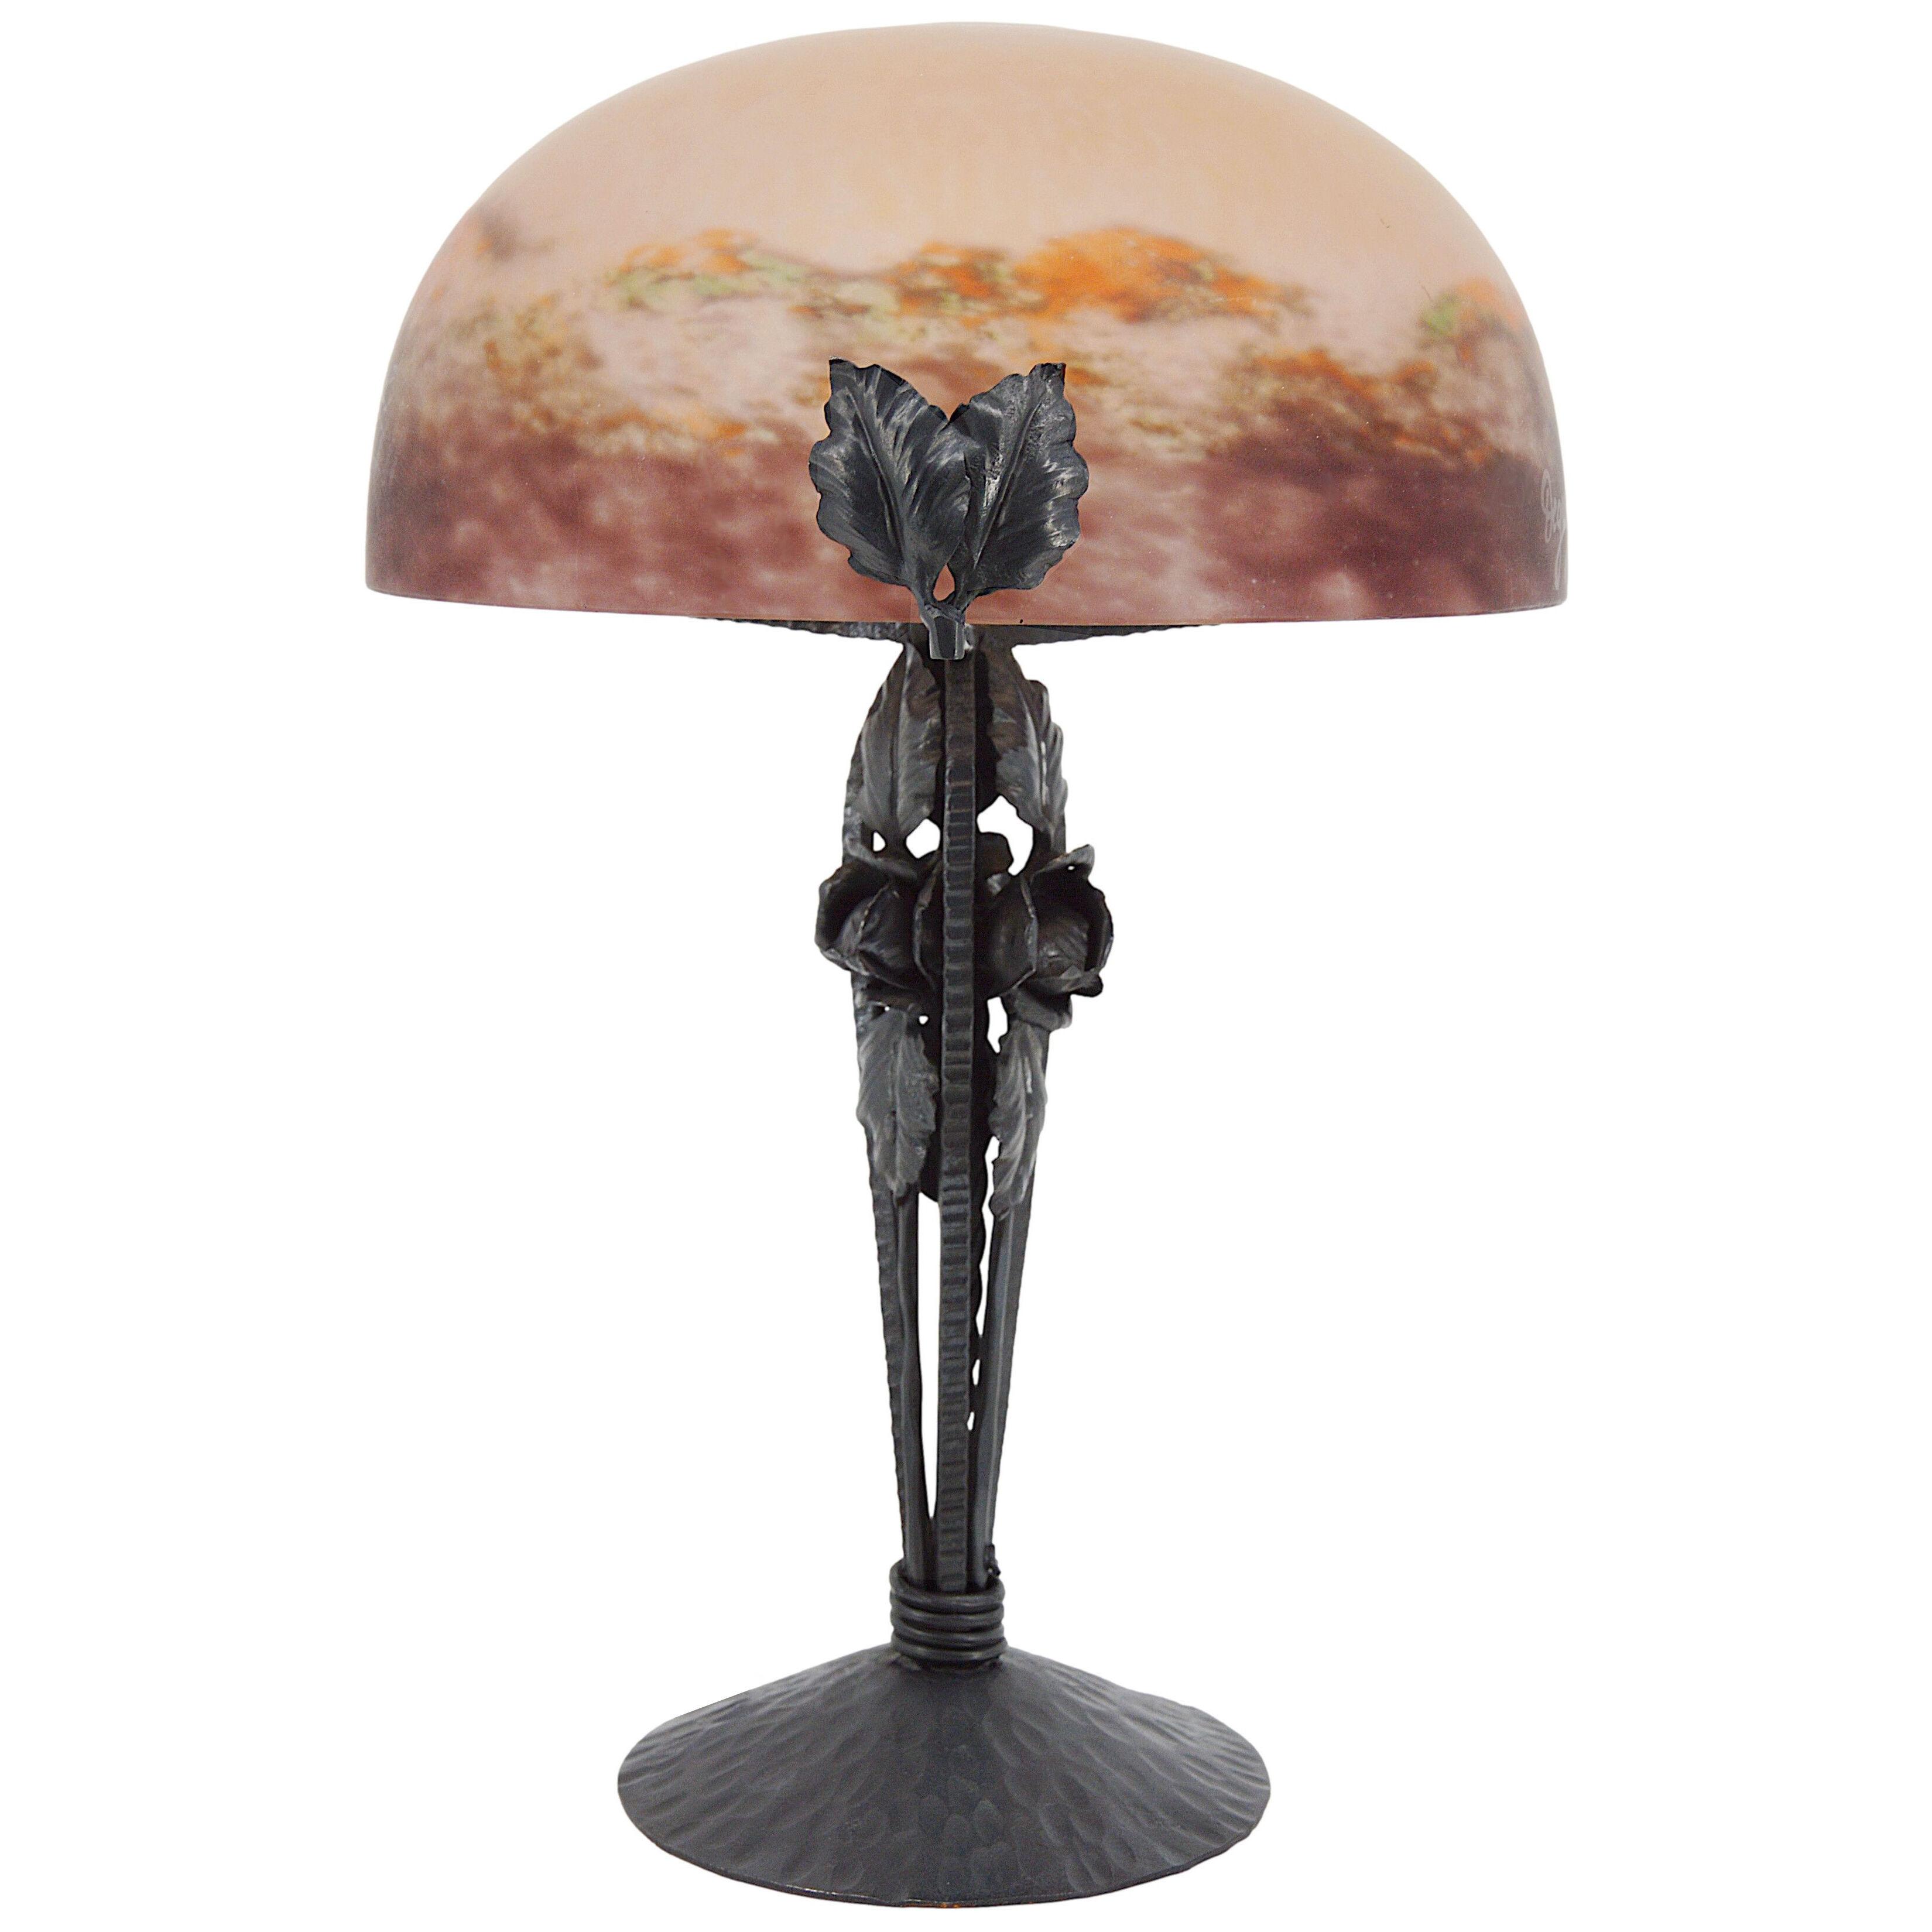 DEGUE French Art Deco Table Lamp, Late 1920s